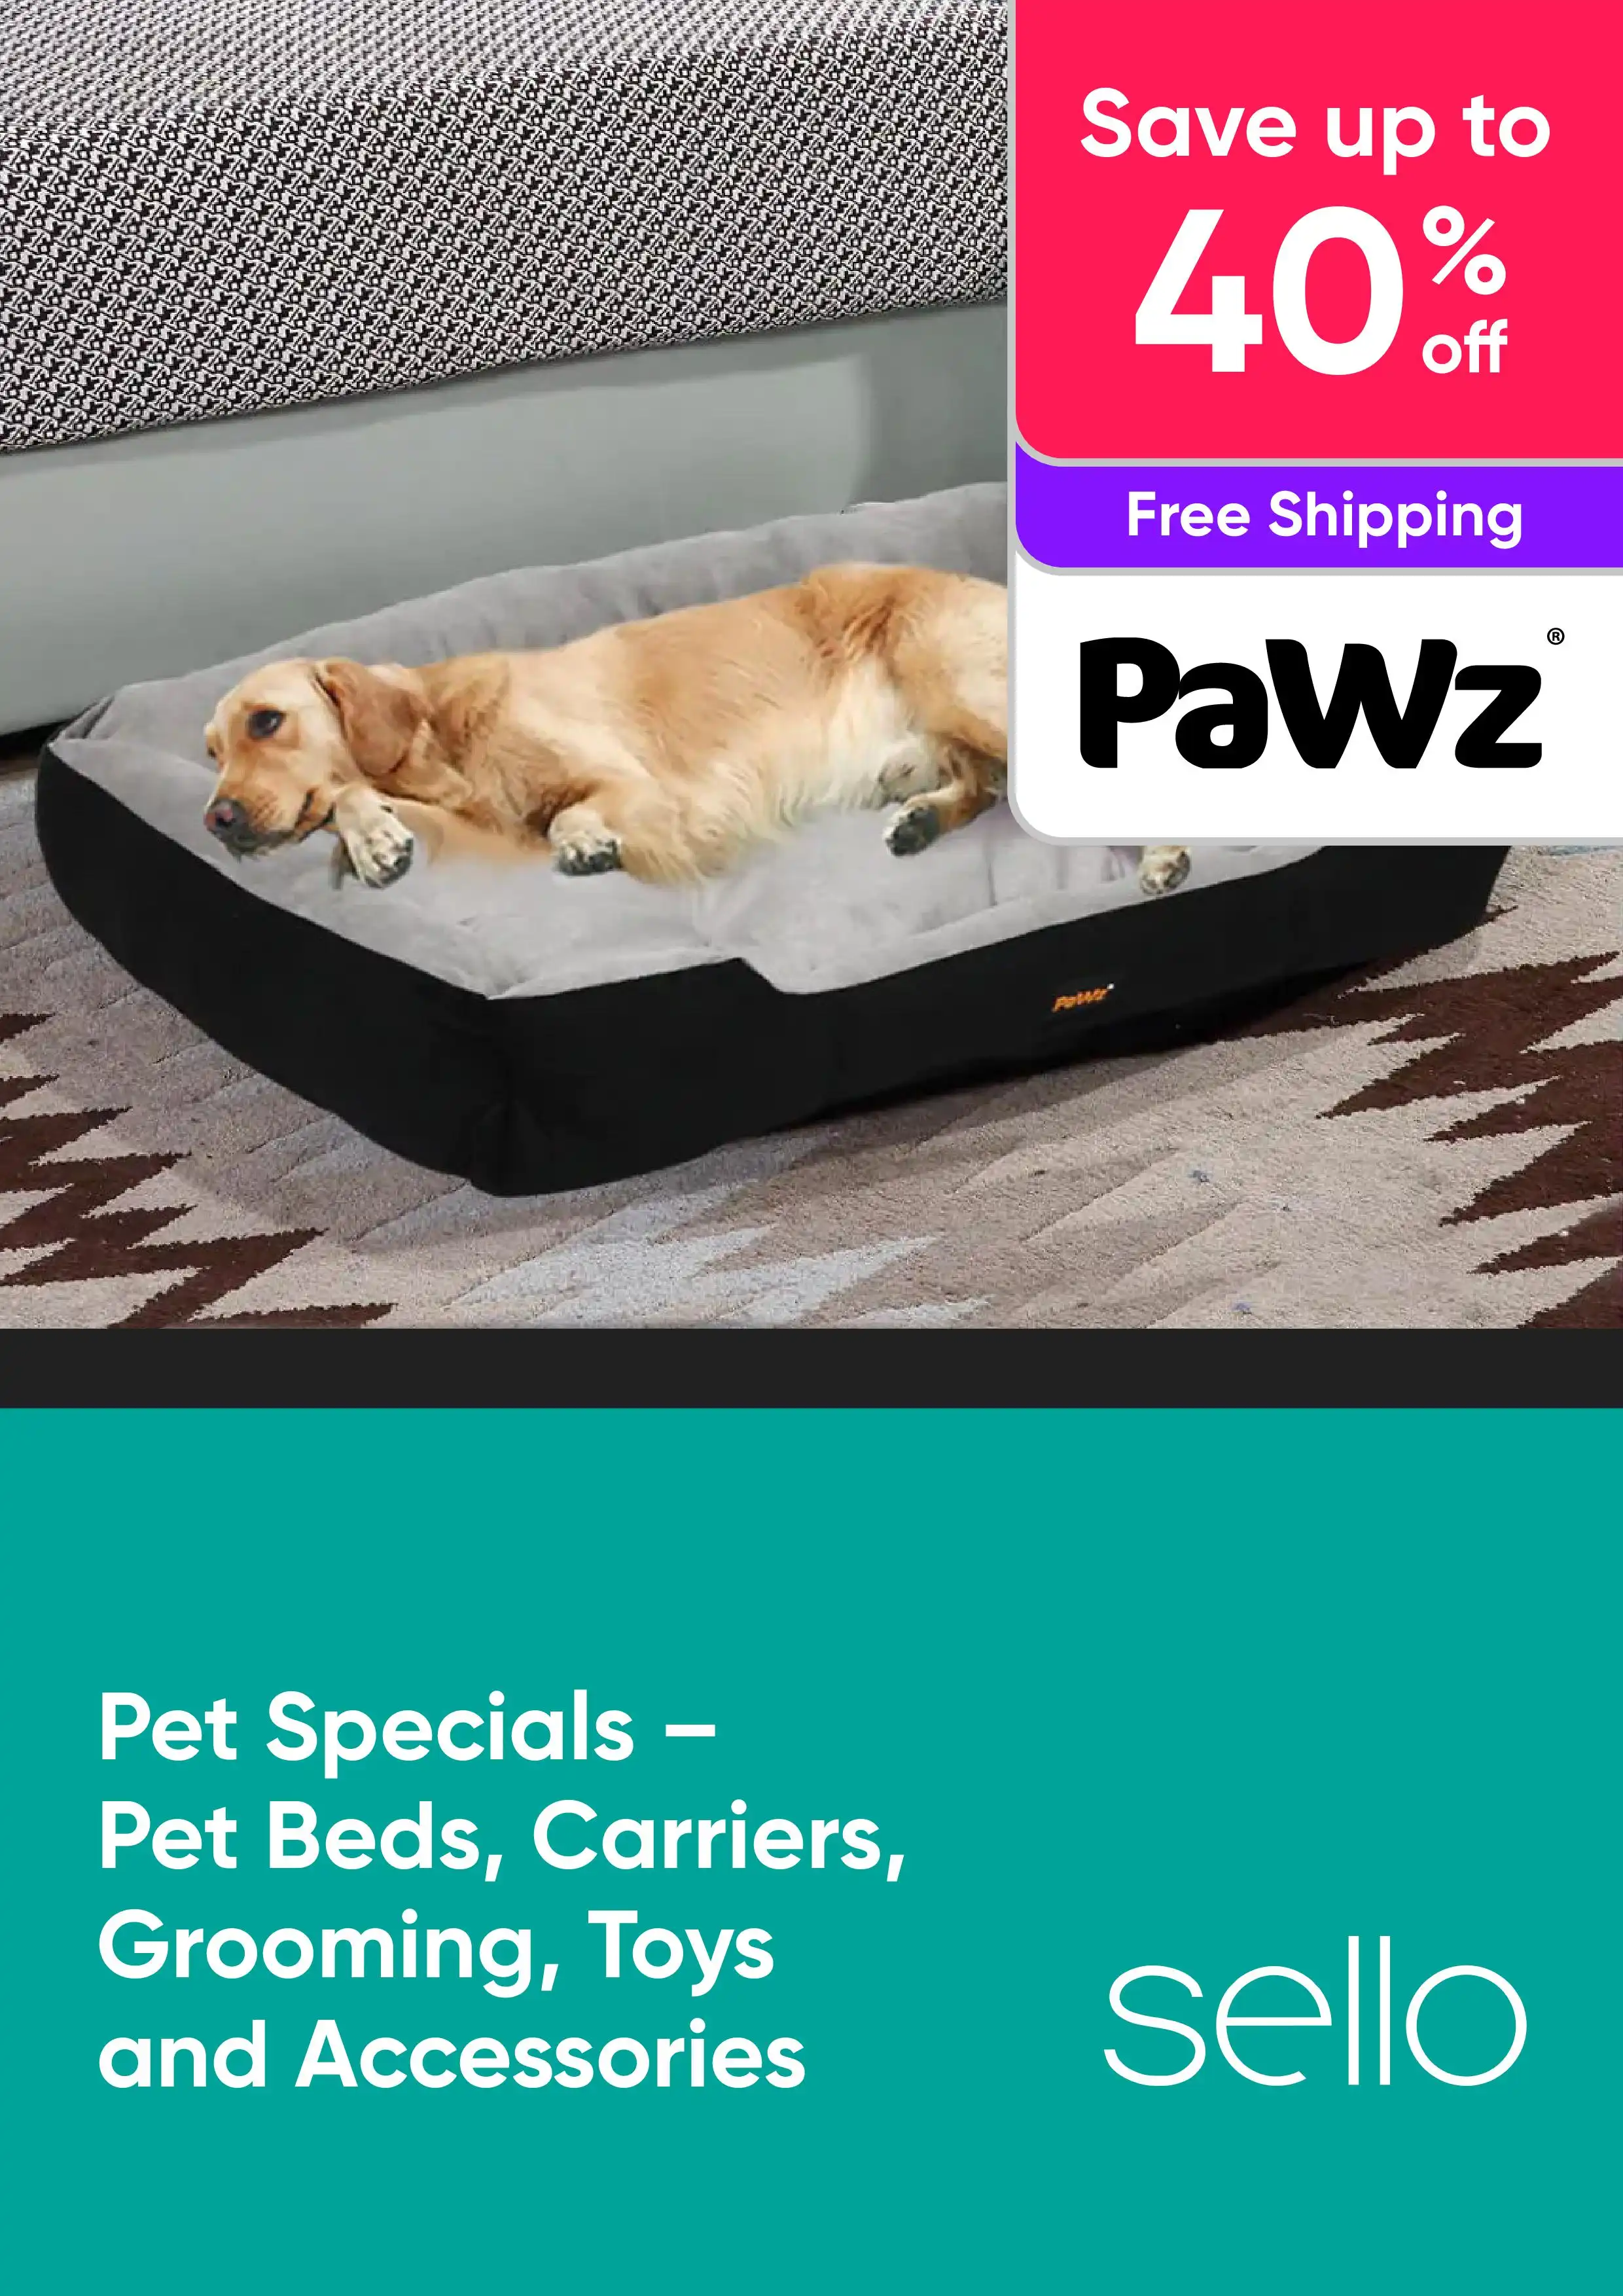 Pet Specials - Pet Beds, Carriers, Grooming and More - Pawz - Up to 40% Off